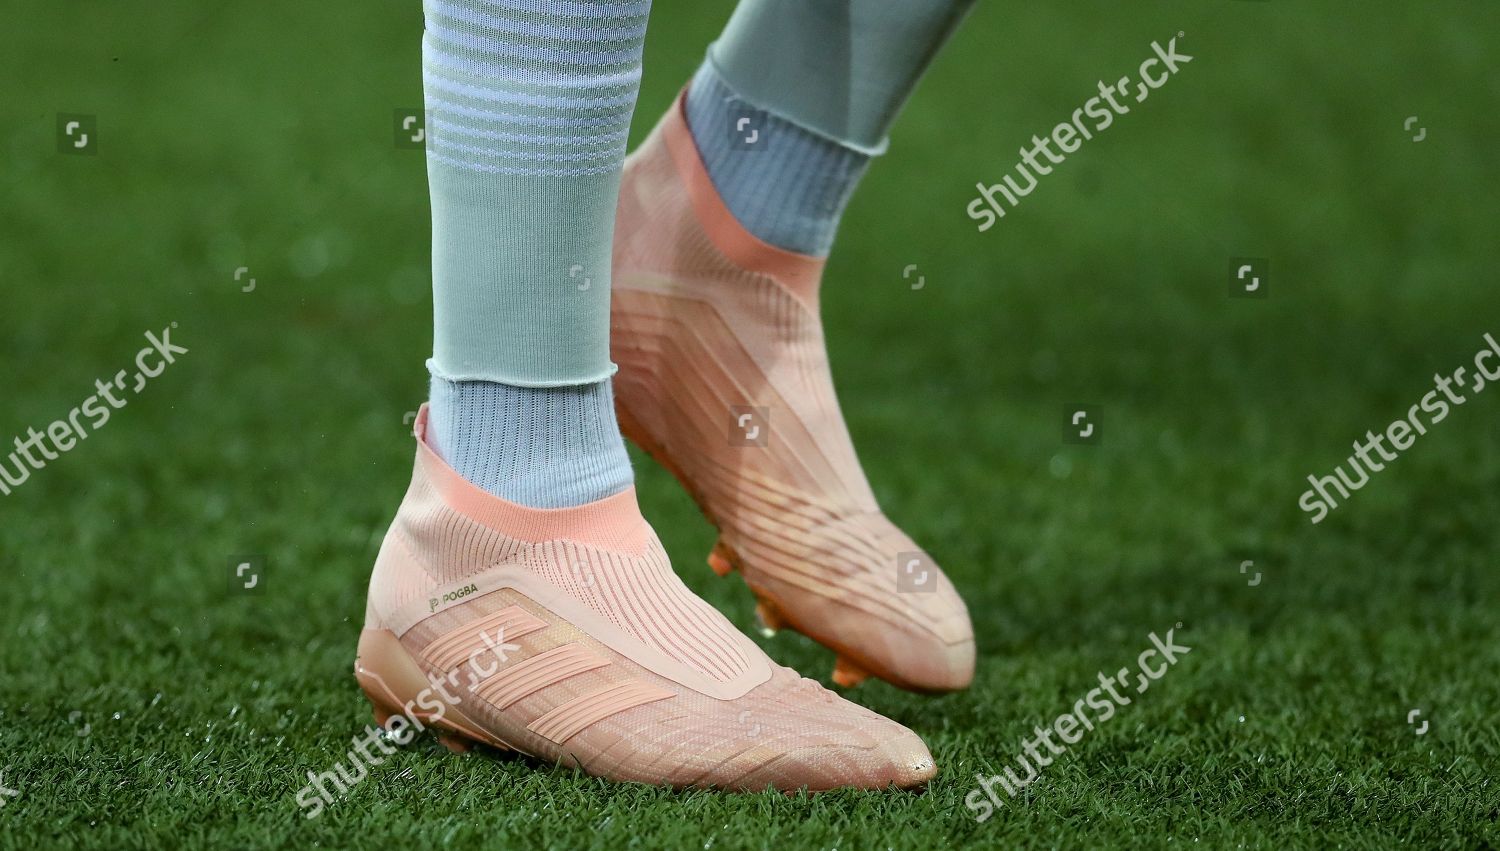 pink pogba boots